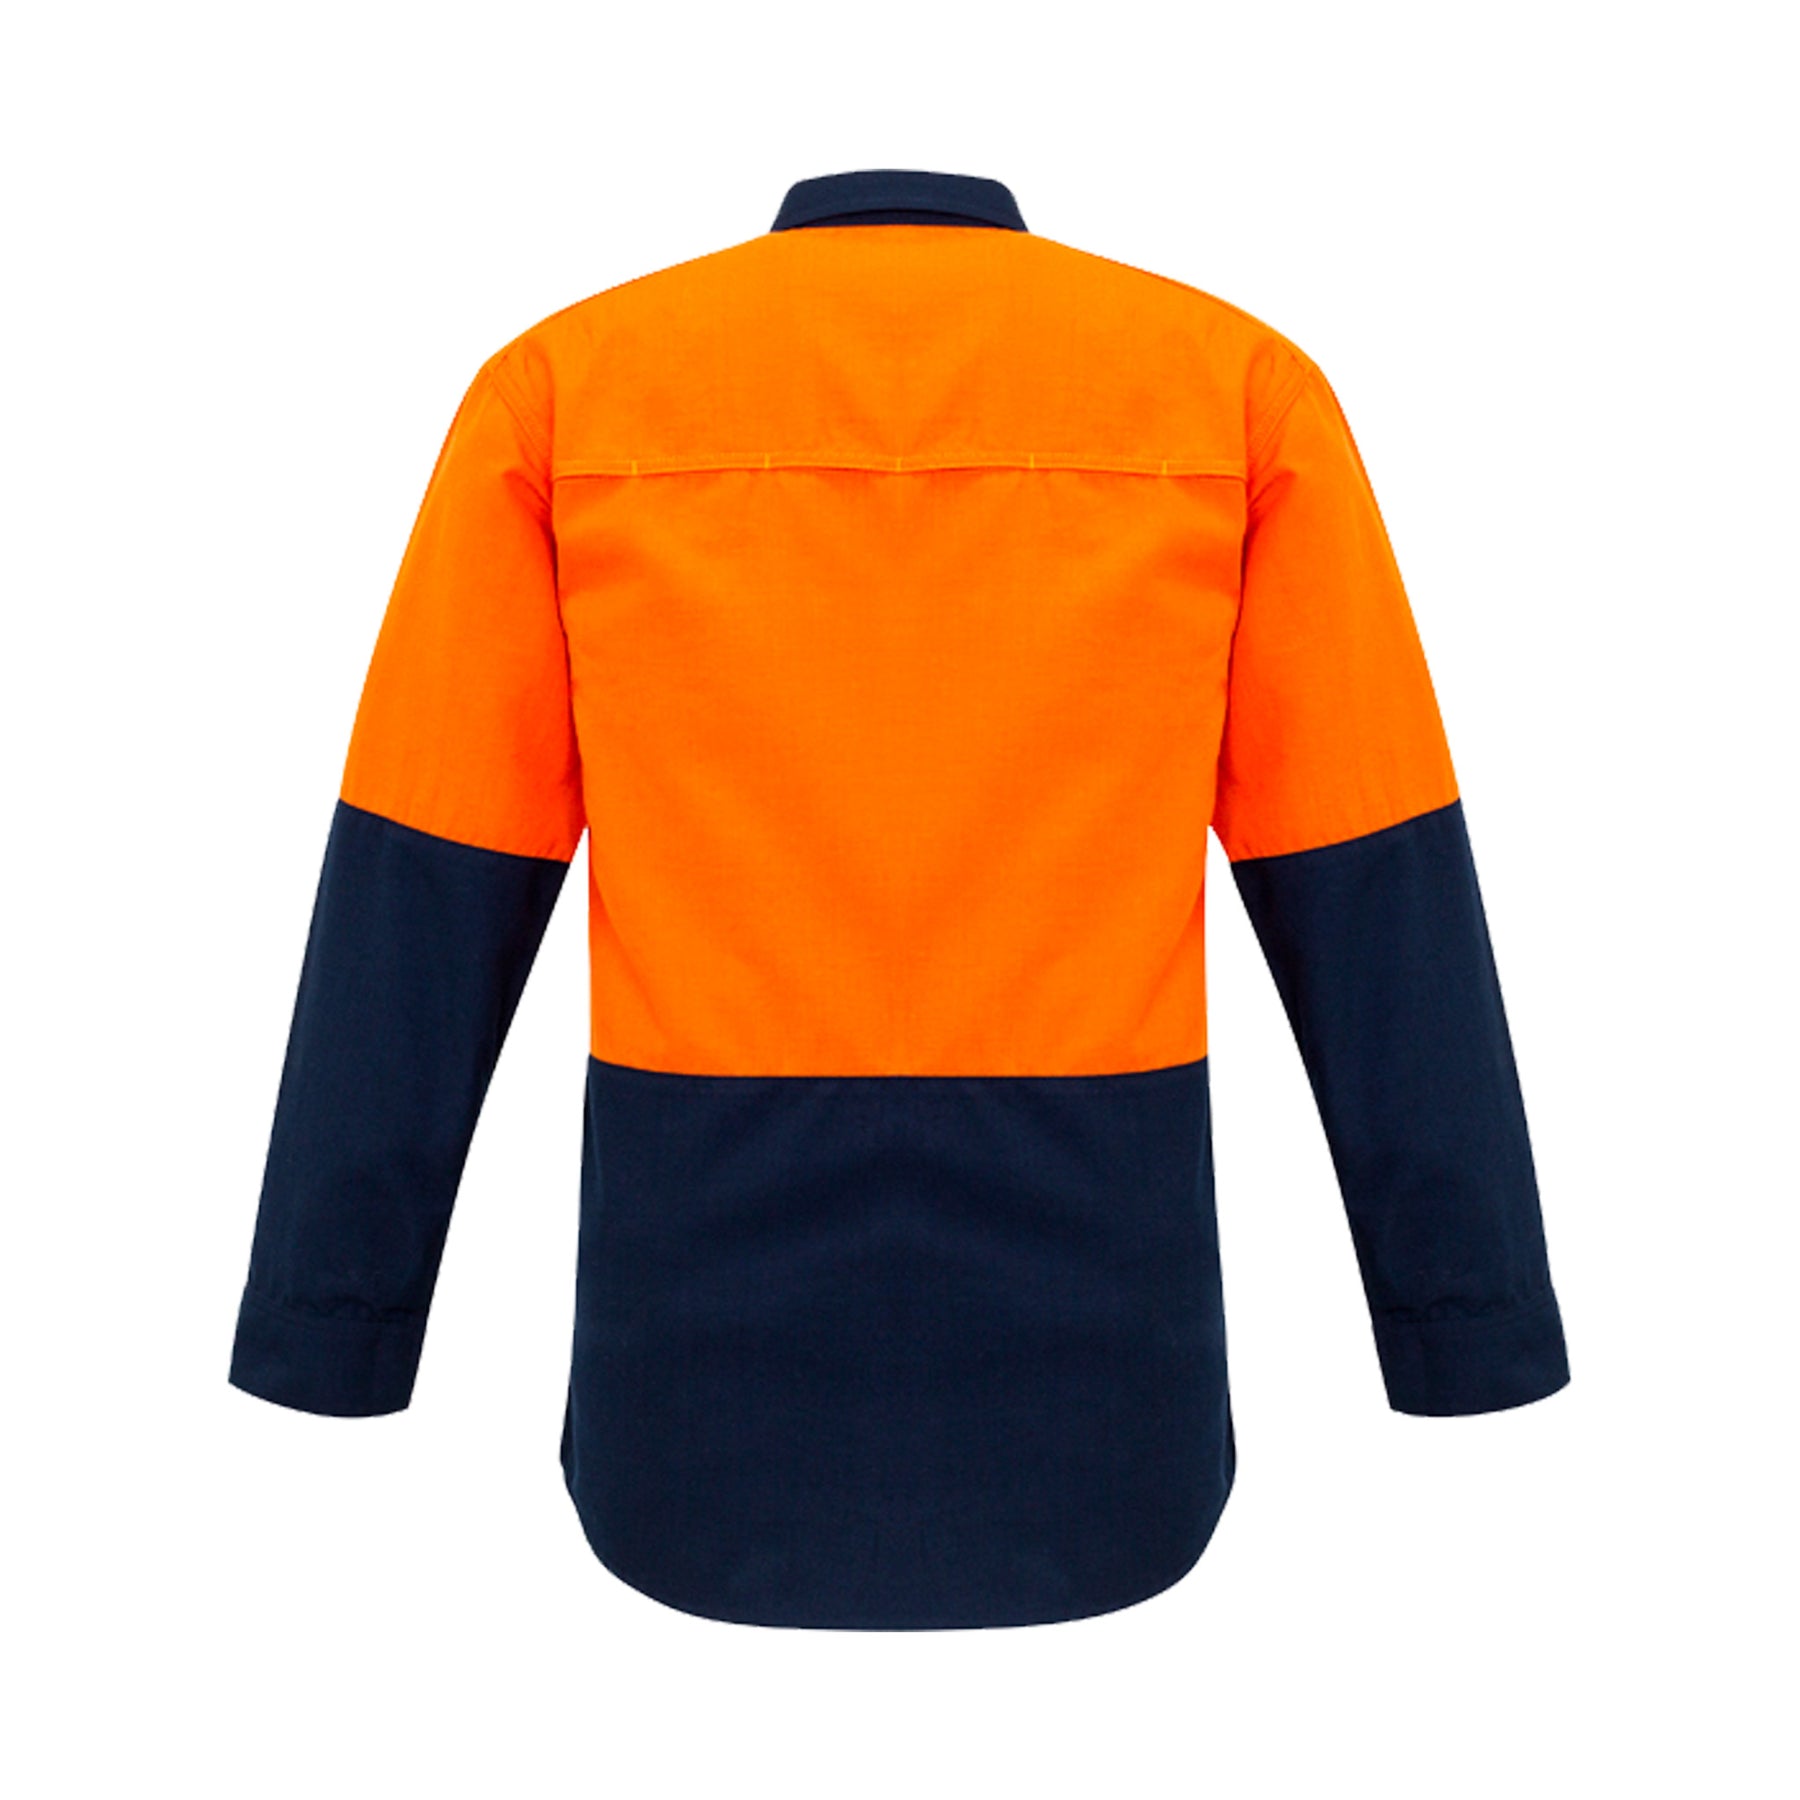 back view of orange navy hi vis spliced shirt with metatech fabric